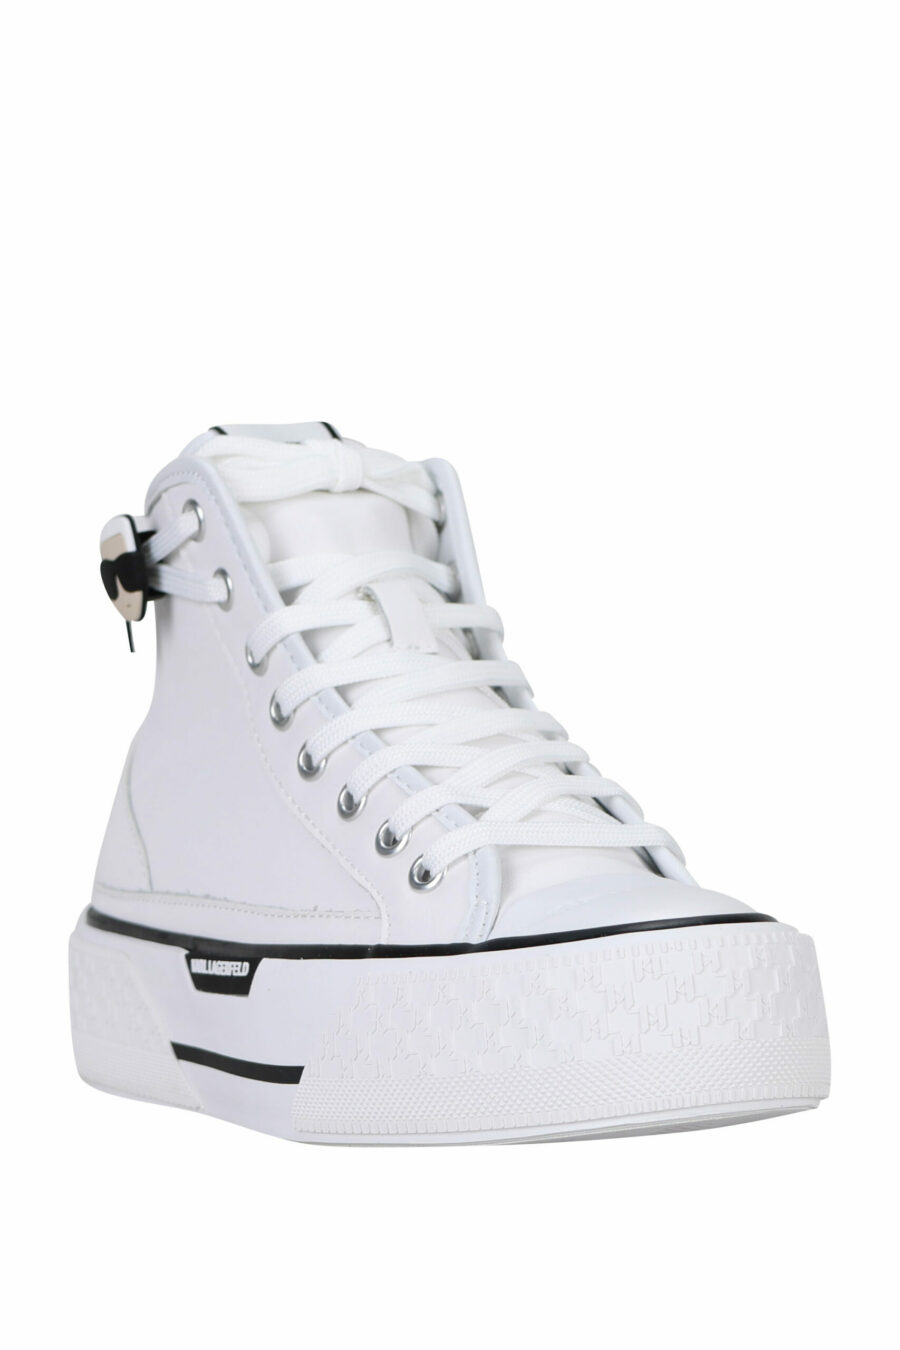 White leather high top trainers with white sole and "karl" logo - 5059529322974 1 scaled